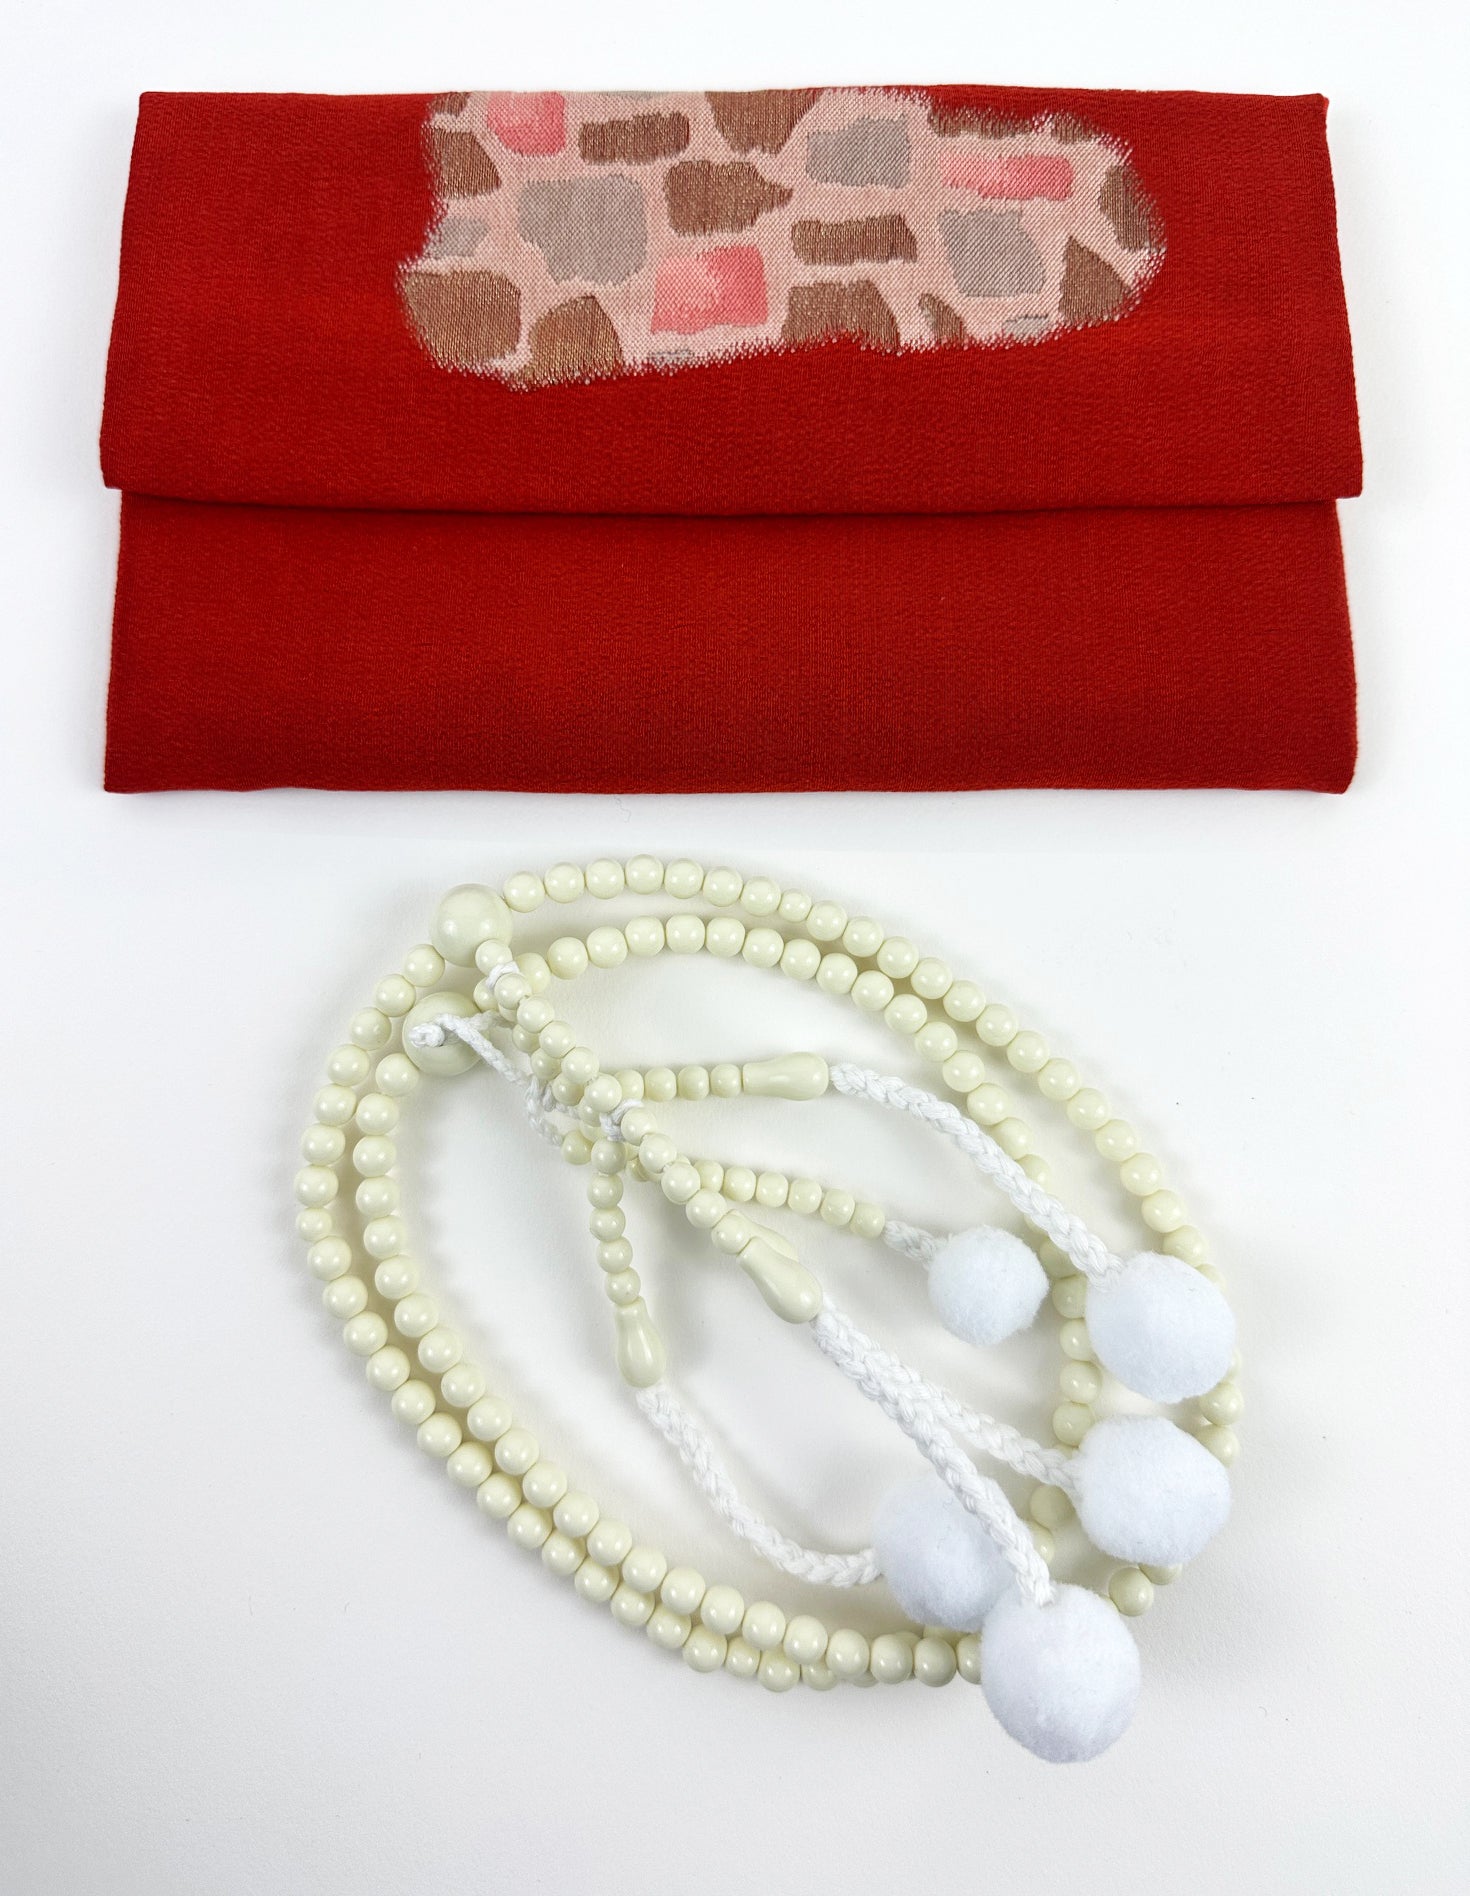 Cream Colored Beads Set - Large Beads (Large Beads Case)